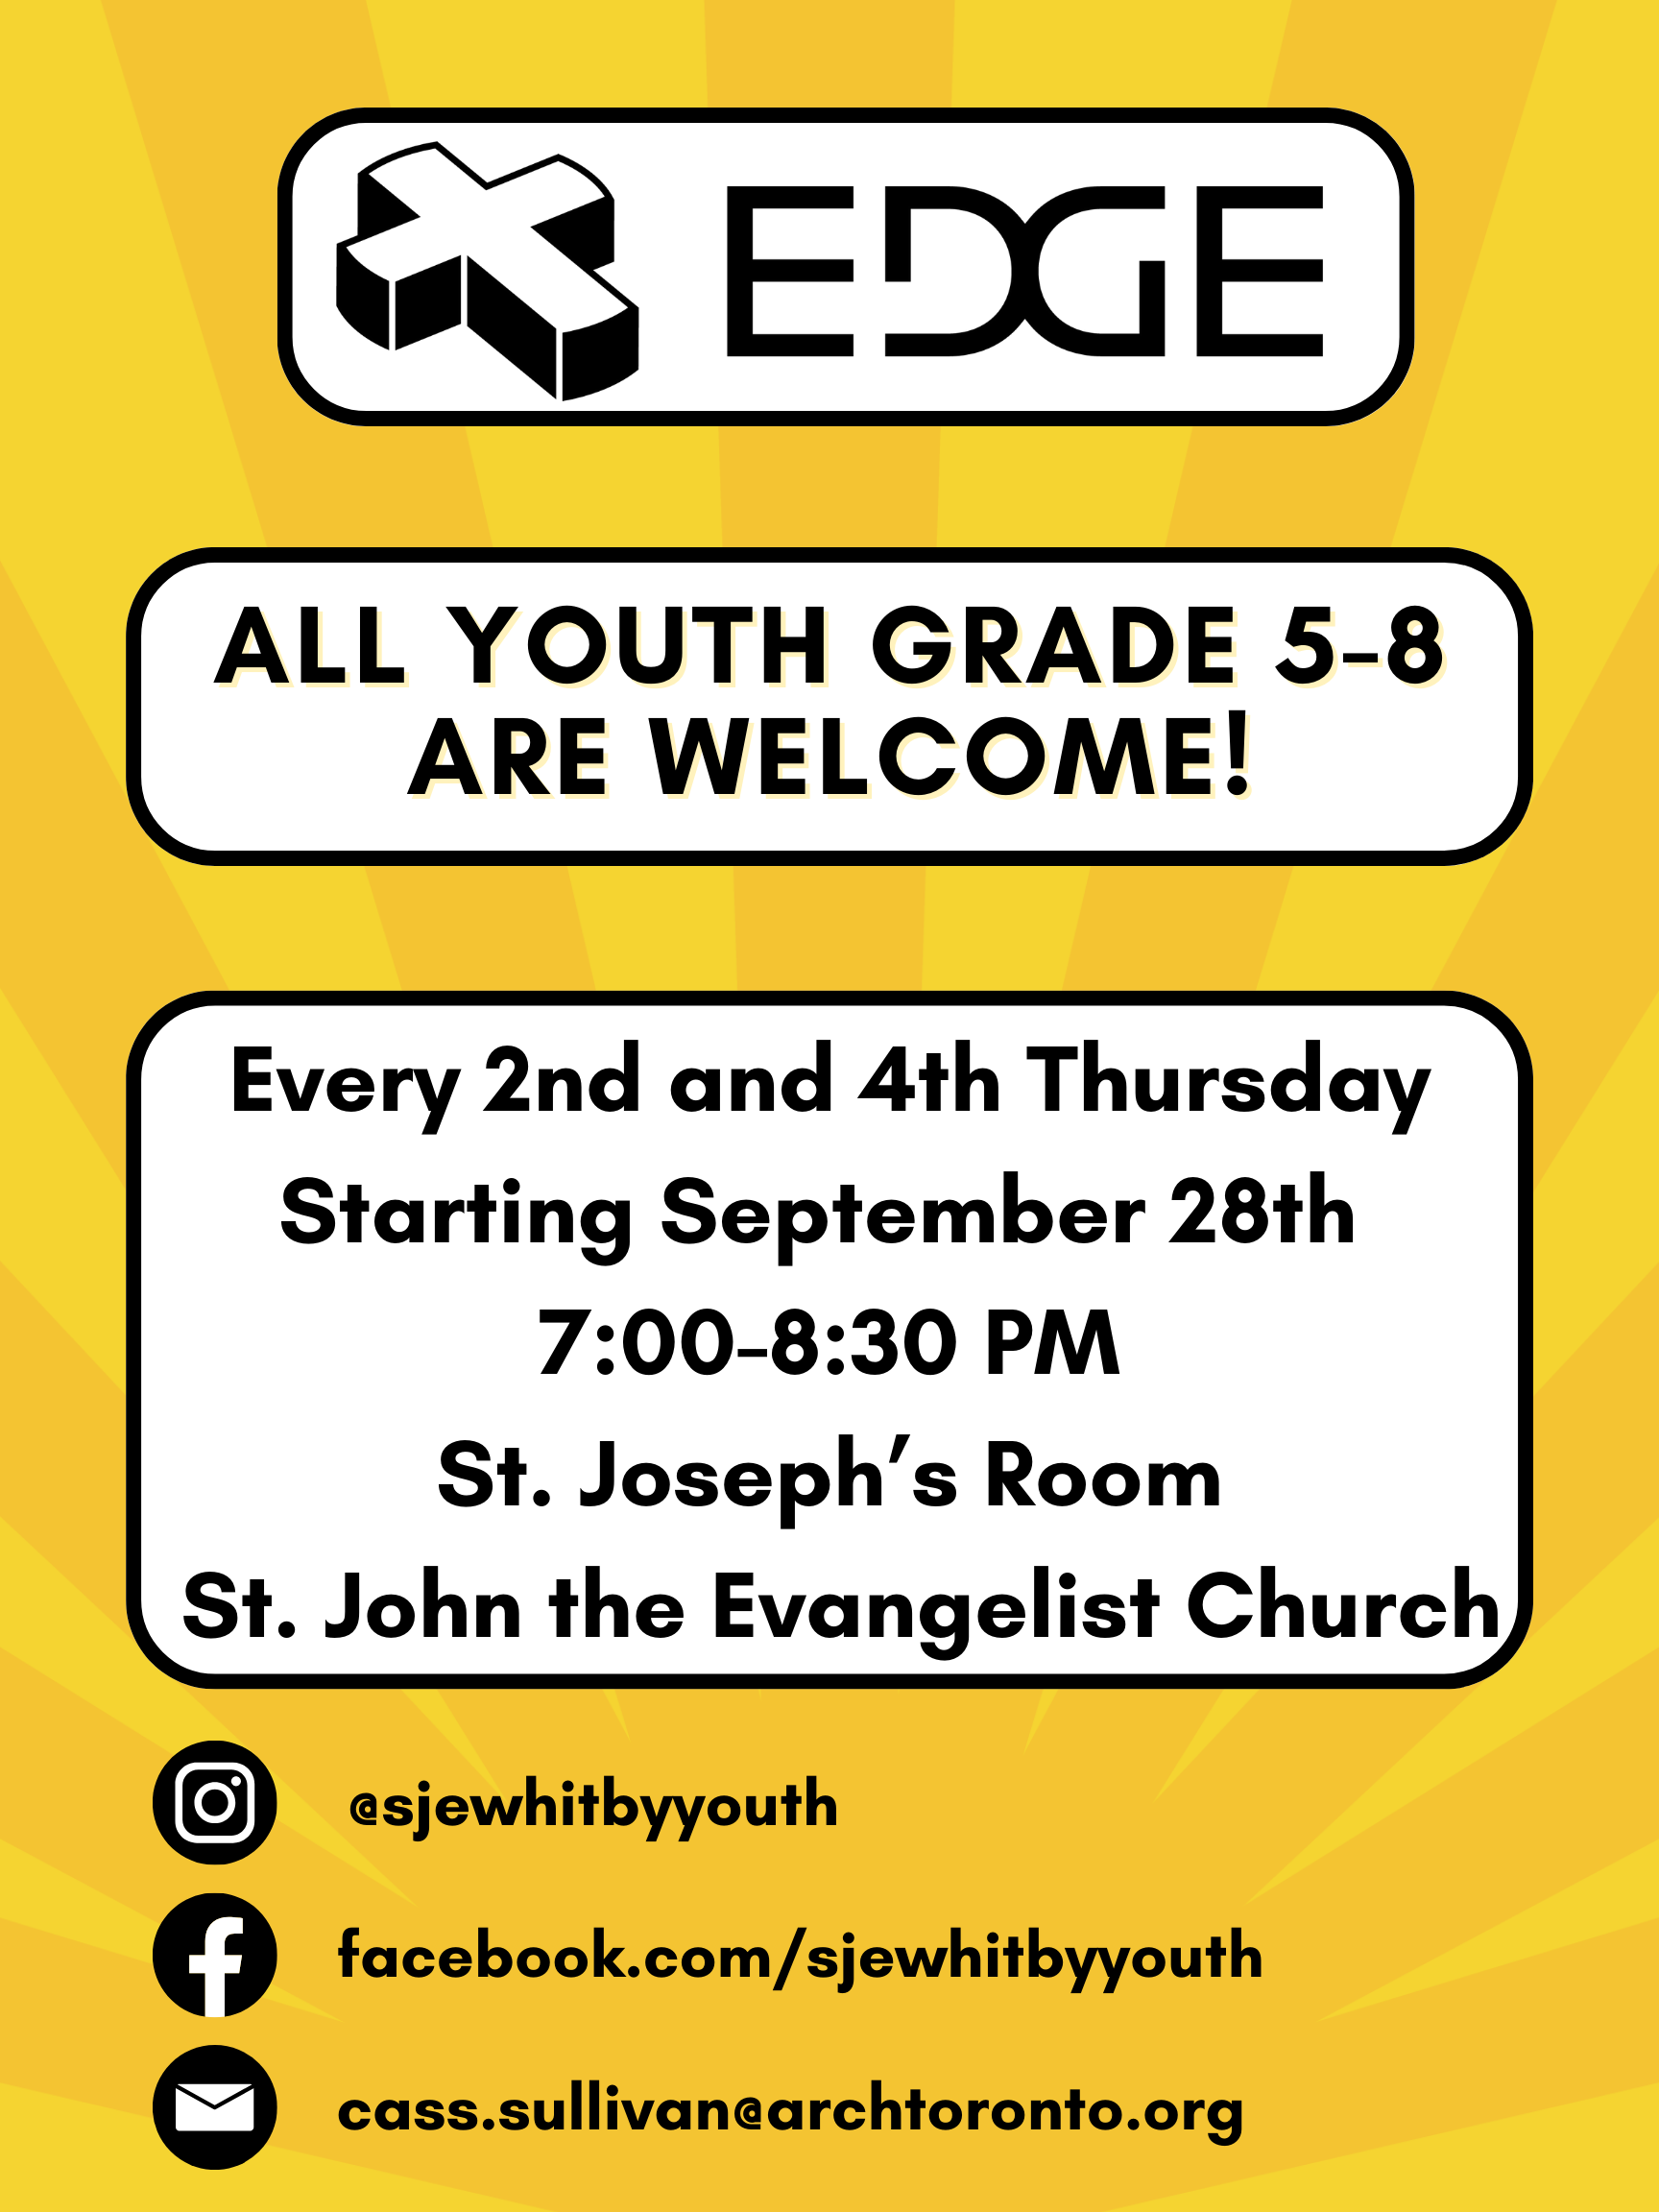 Bright yellow poster advertising EDGE program for youth grade 5-8